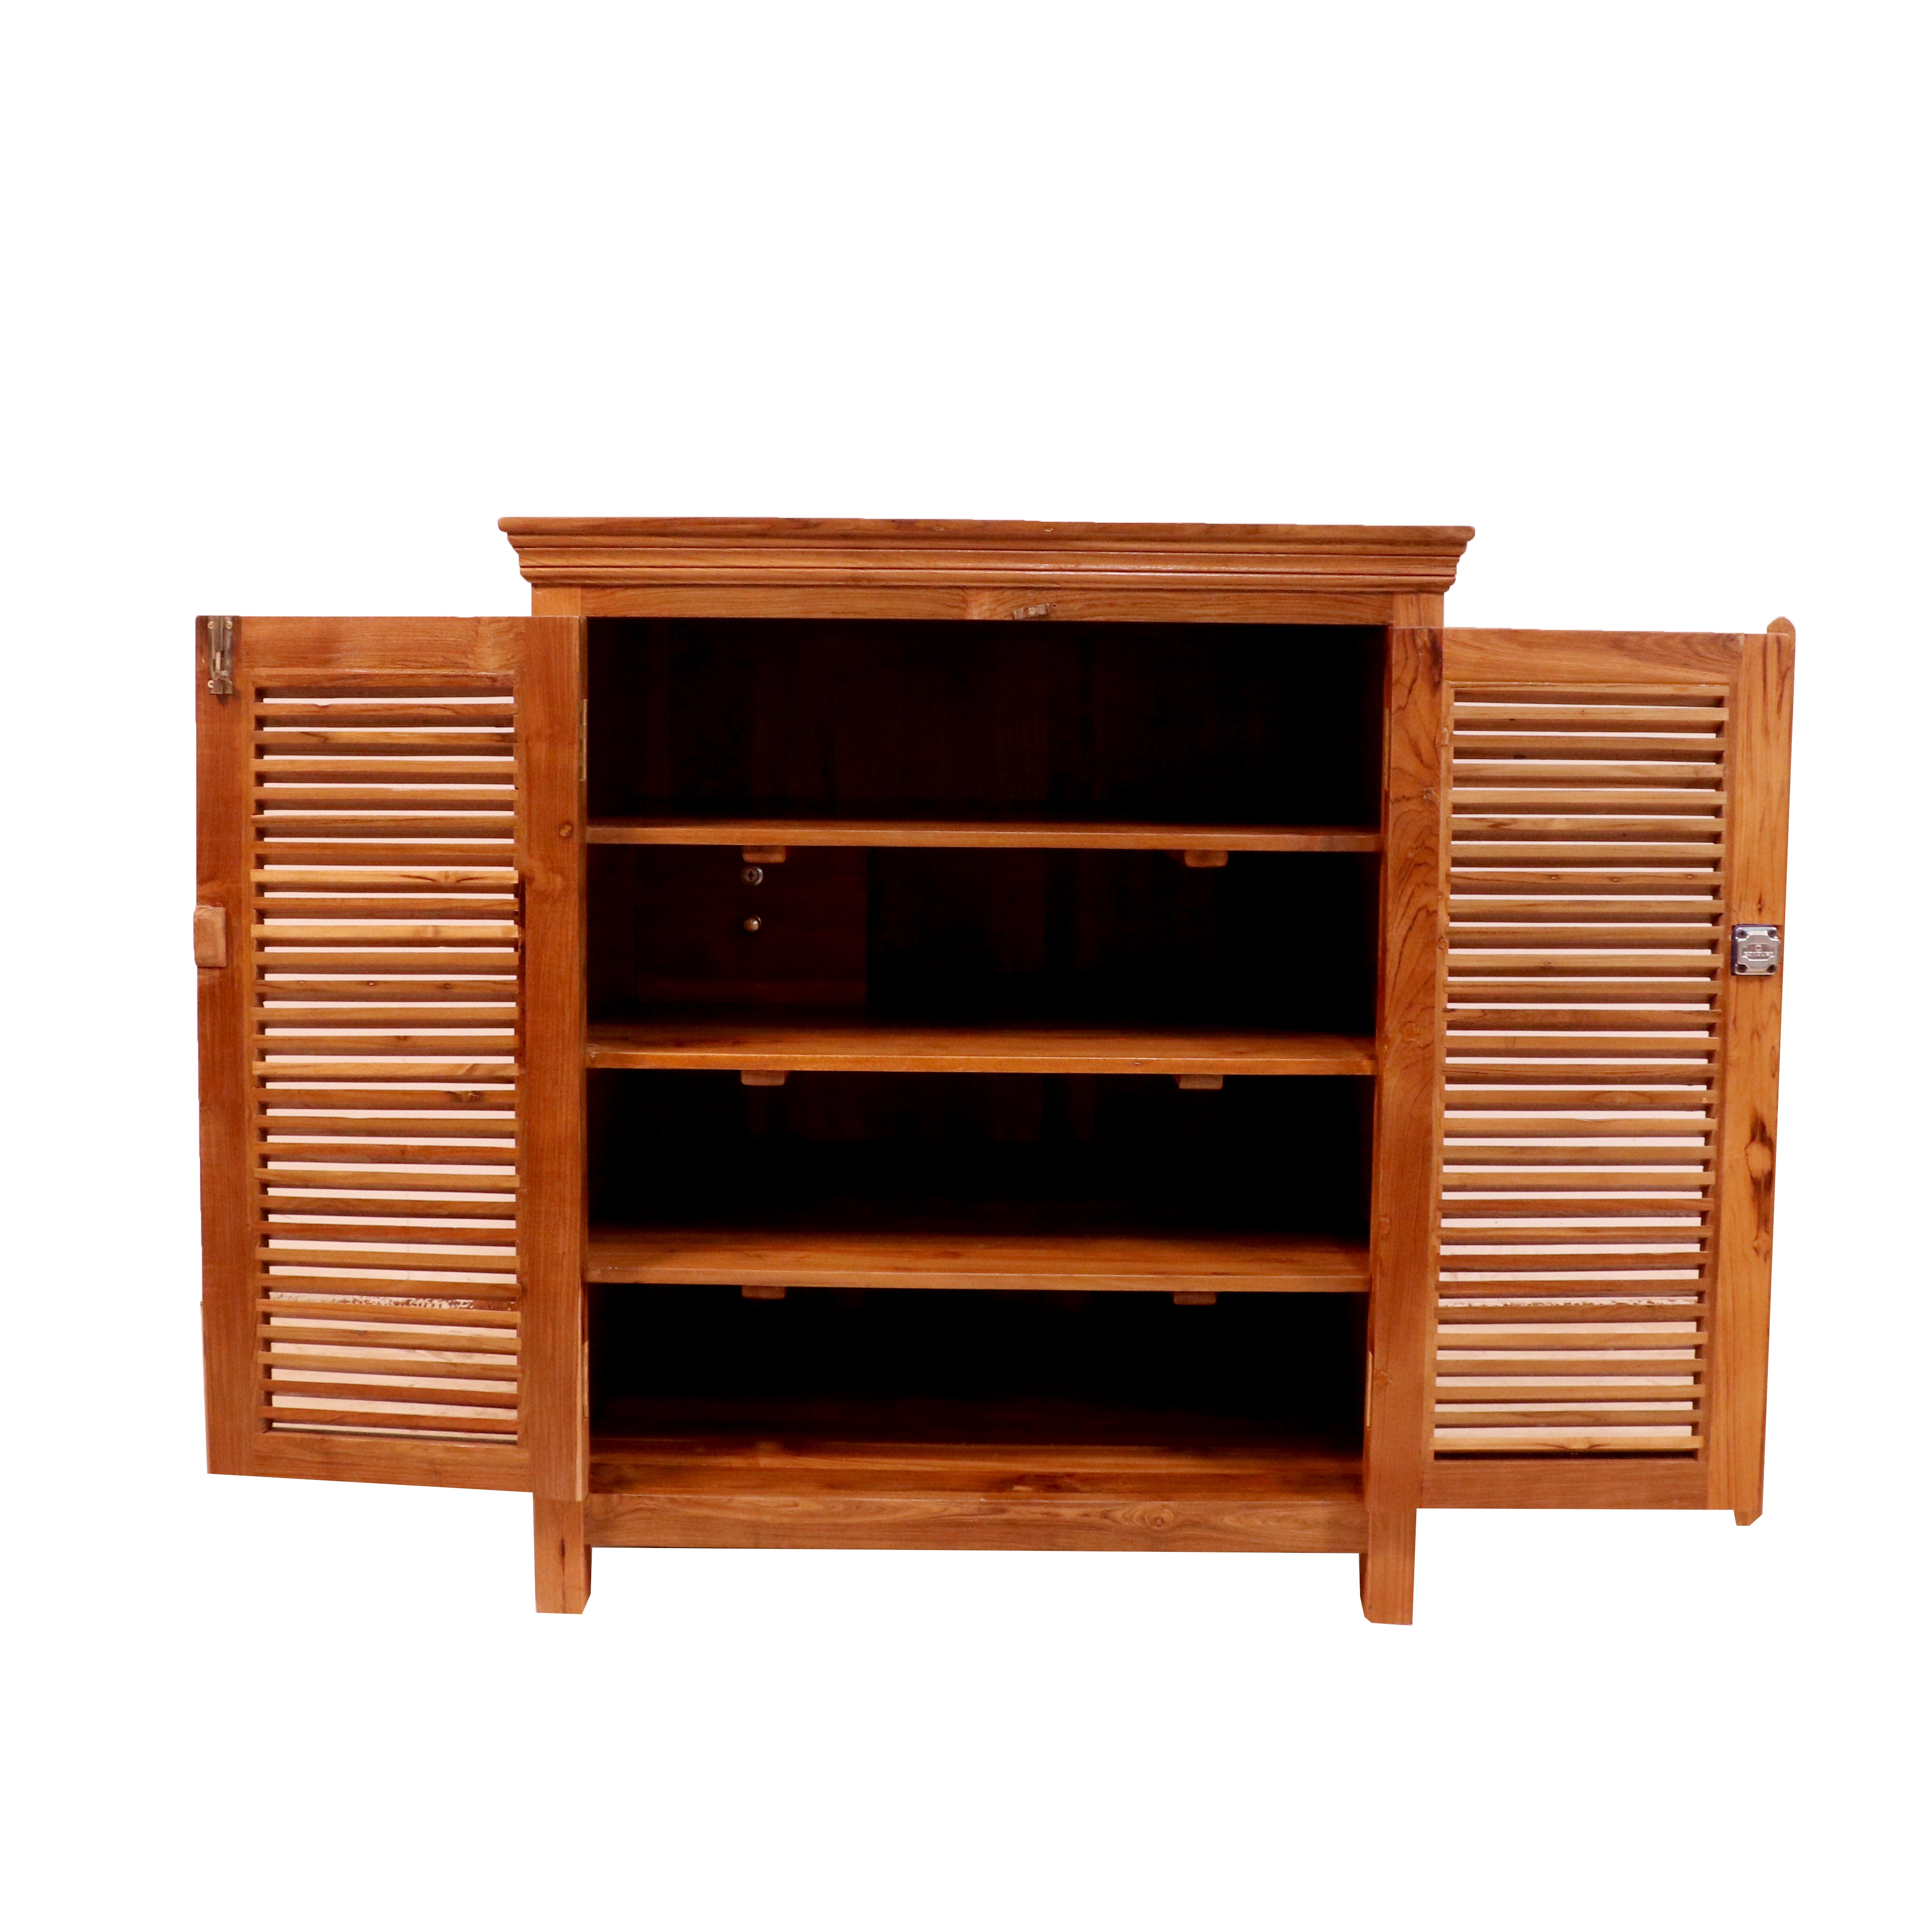 Fusion Simple Stripped Handmade Wooden Simple Storage Cupboard for Home Cupboard